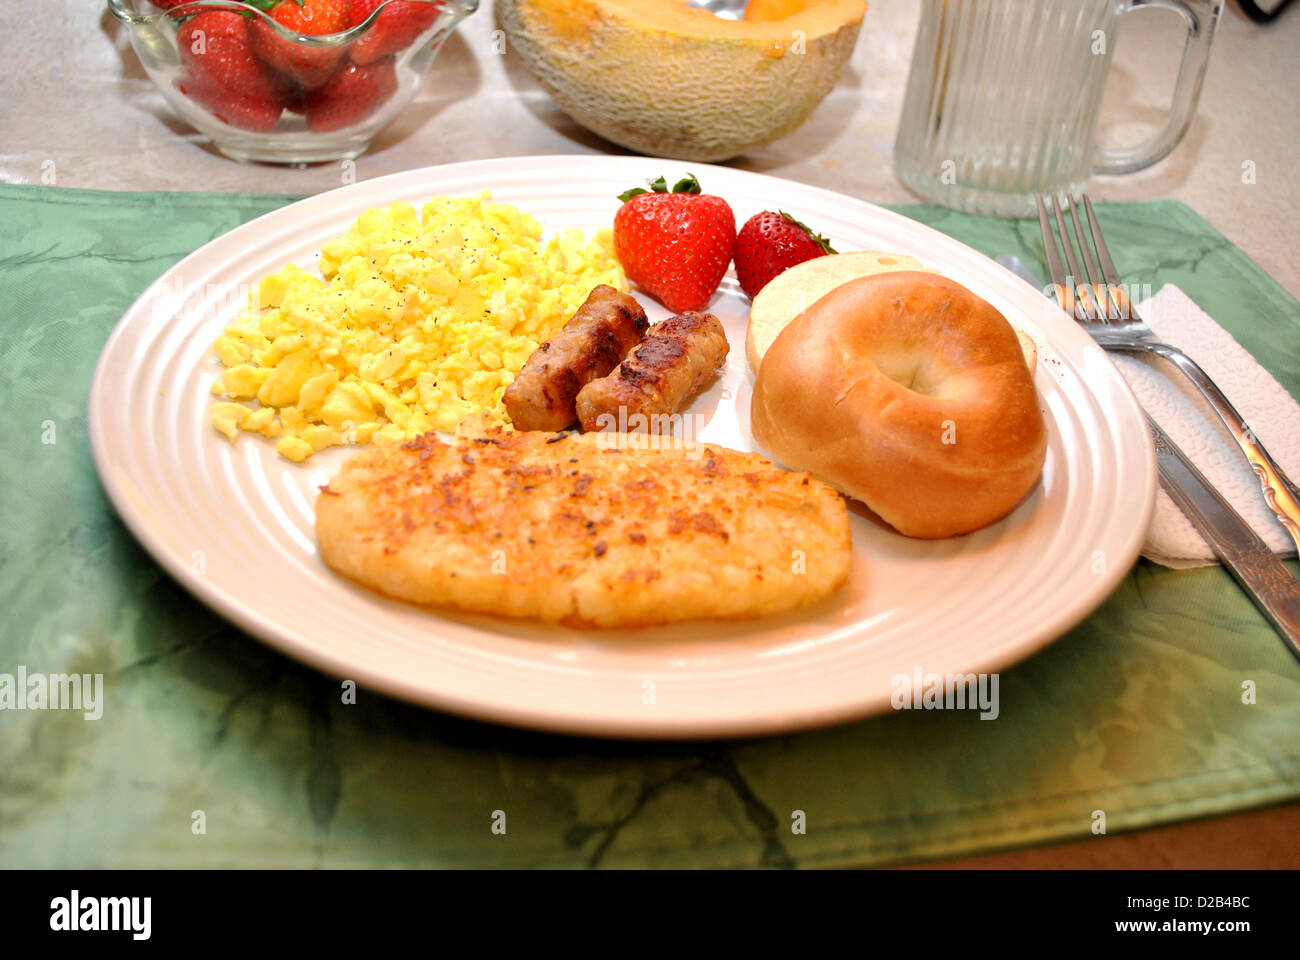 Healthy and Delicious Breakfast Stock Photo